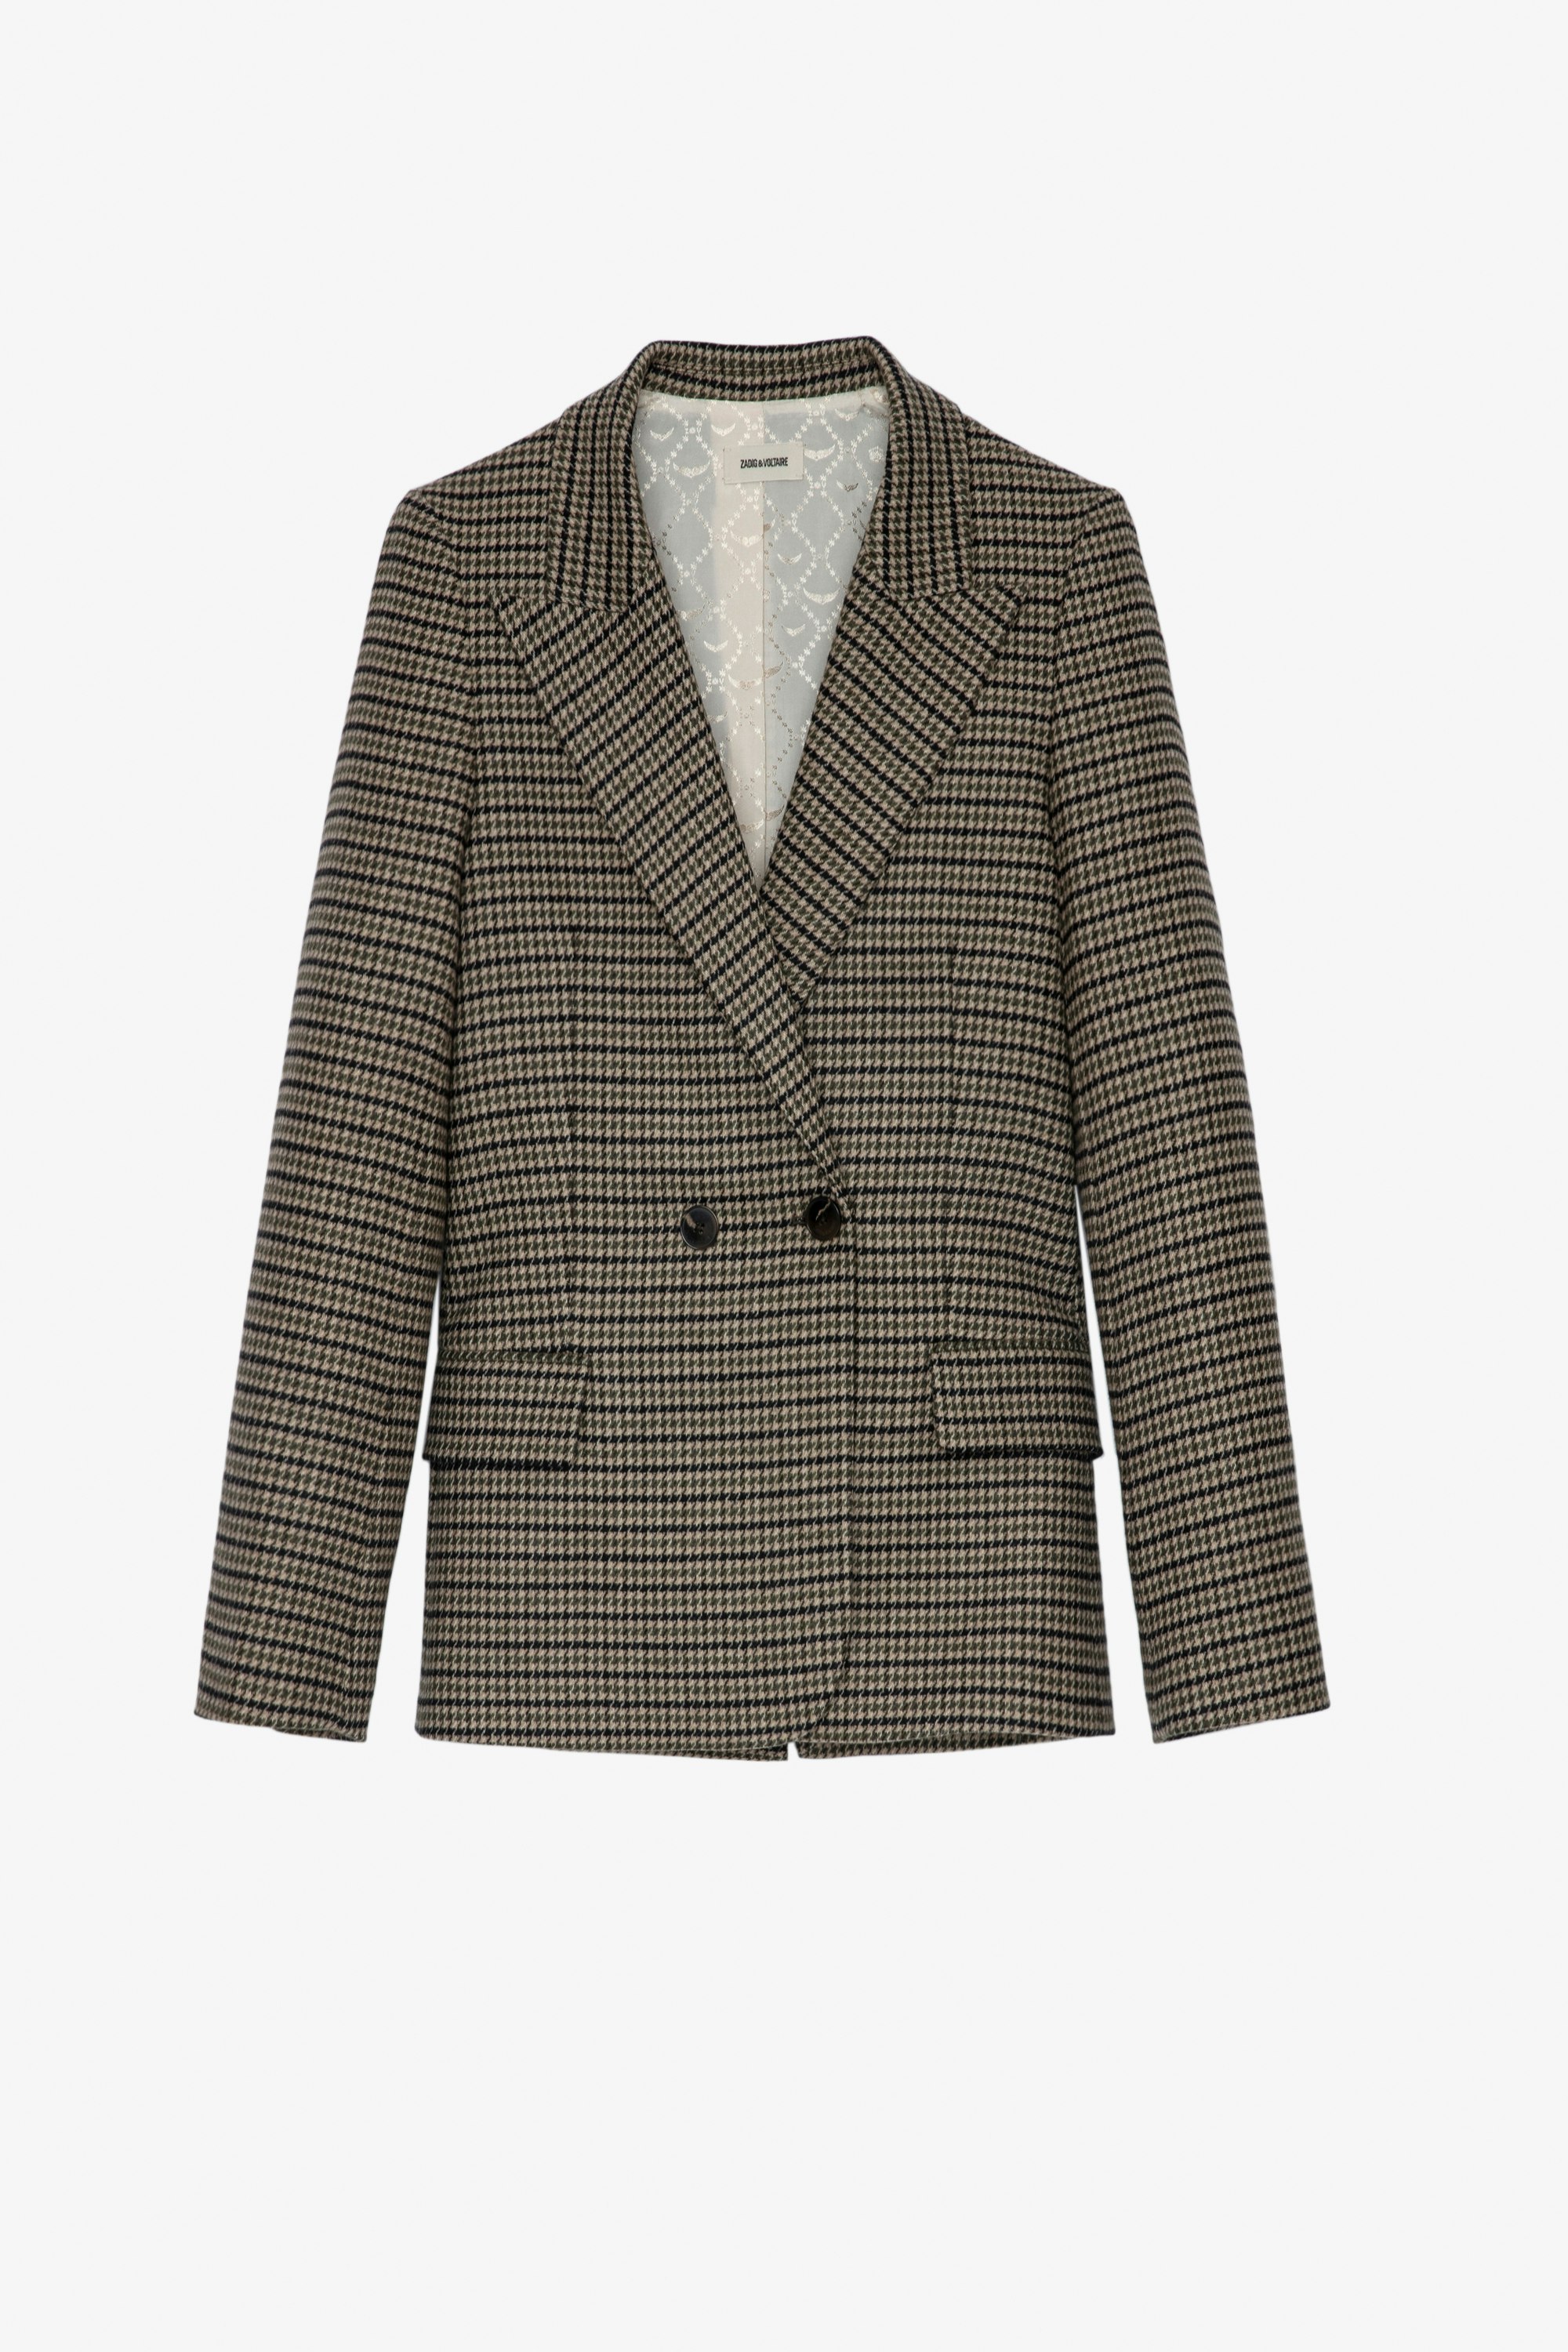 Visit ジャケット Women’s khaki tailored jacket in houndstooth check with star patches on the elbows